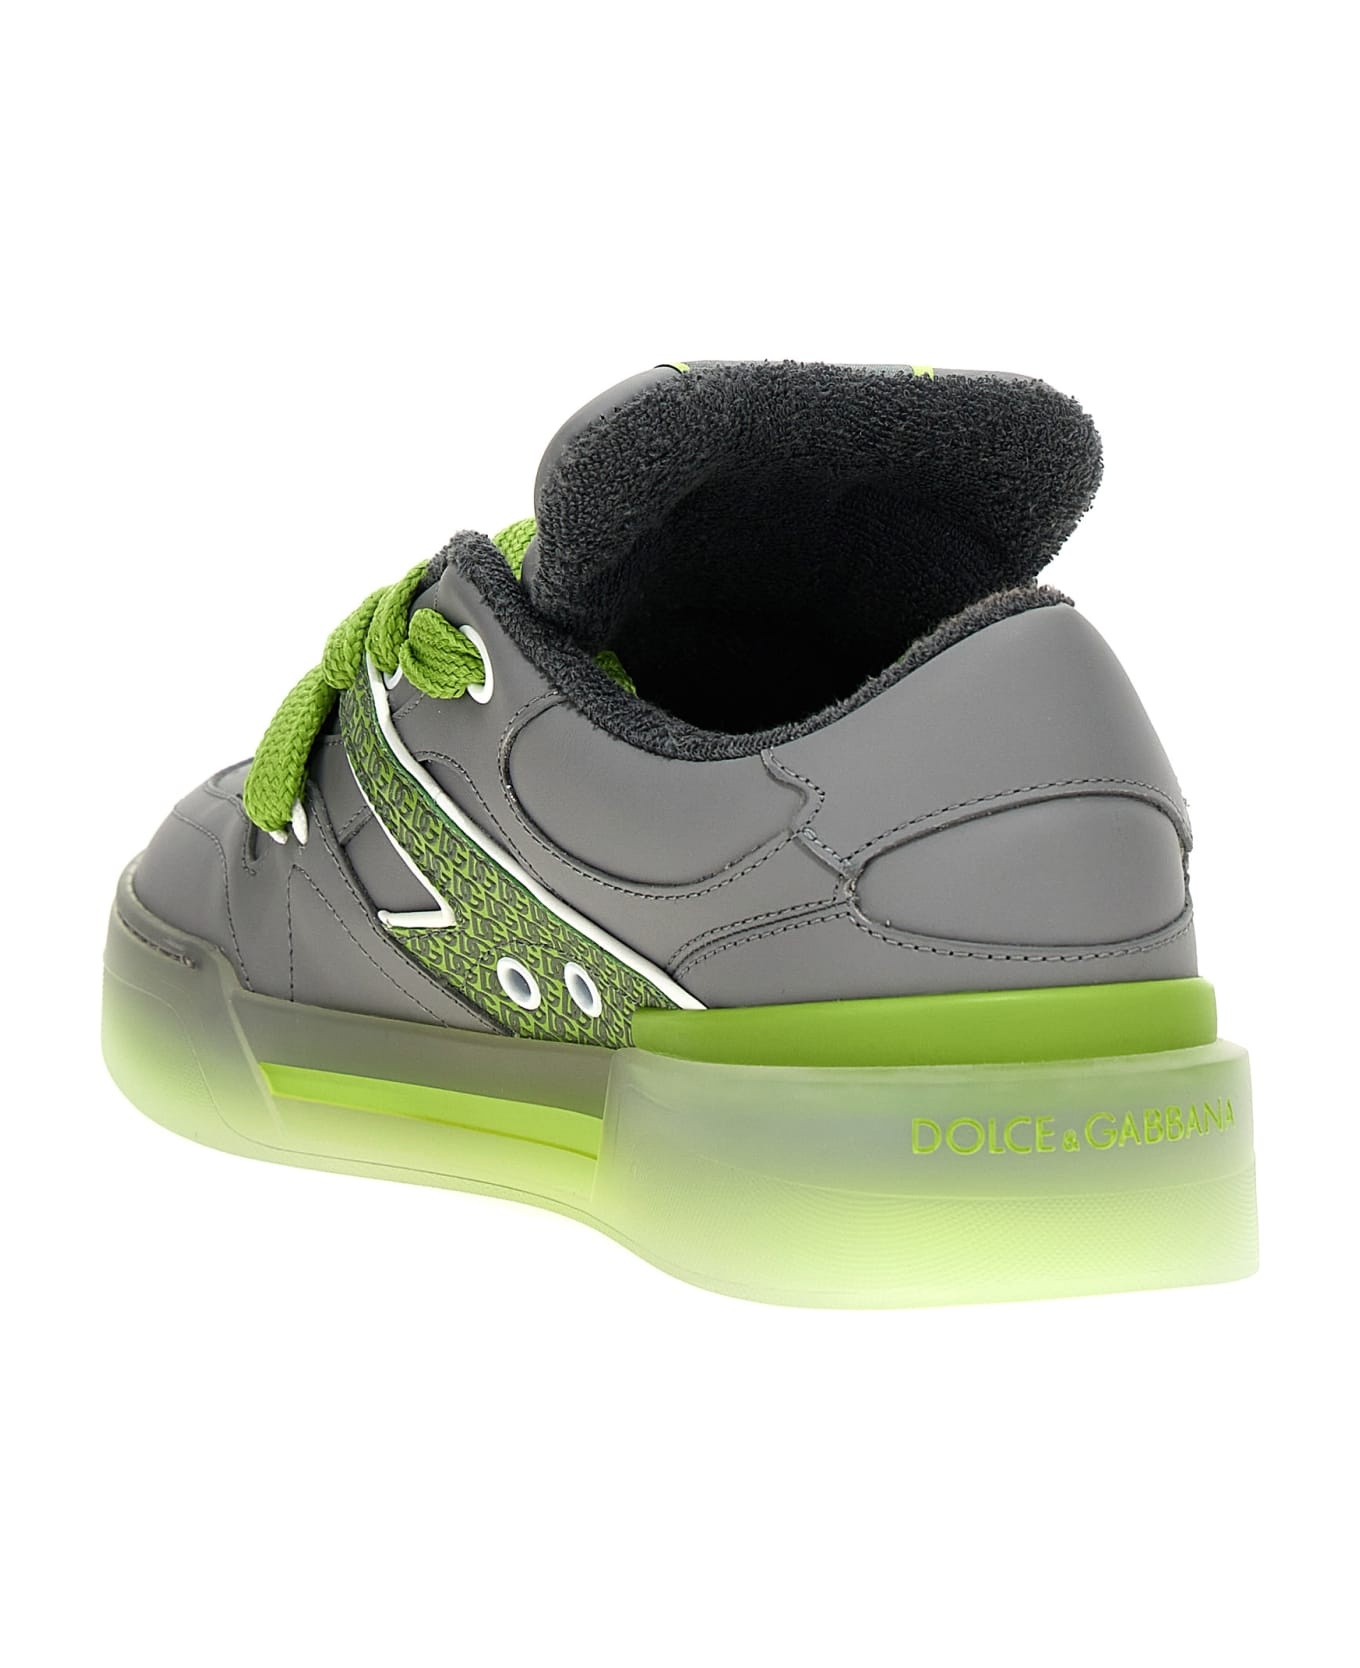 New Roma Leather Sneaker - 3